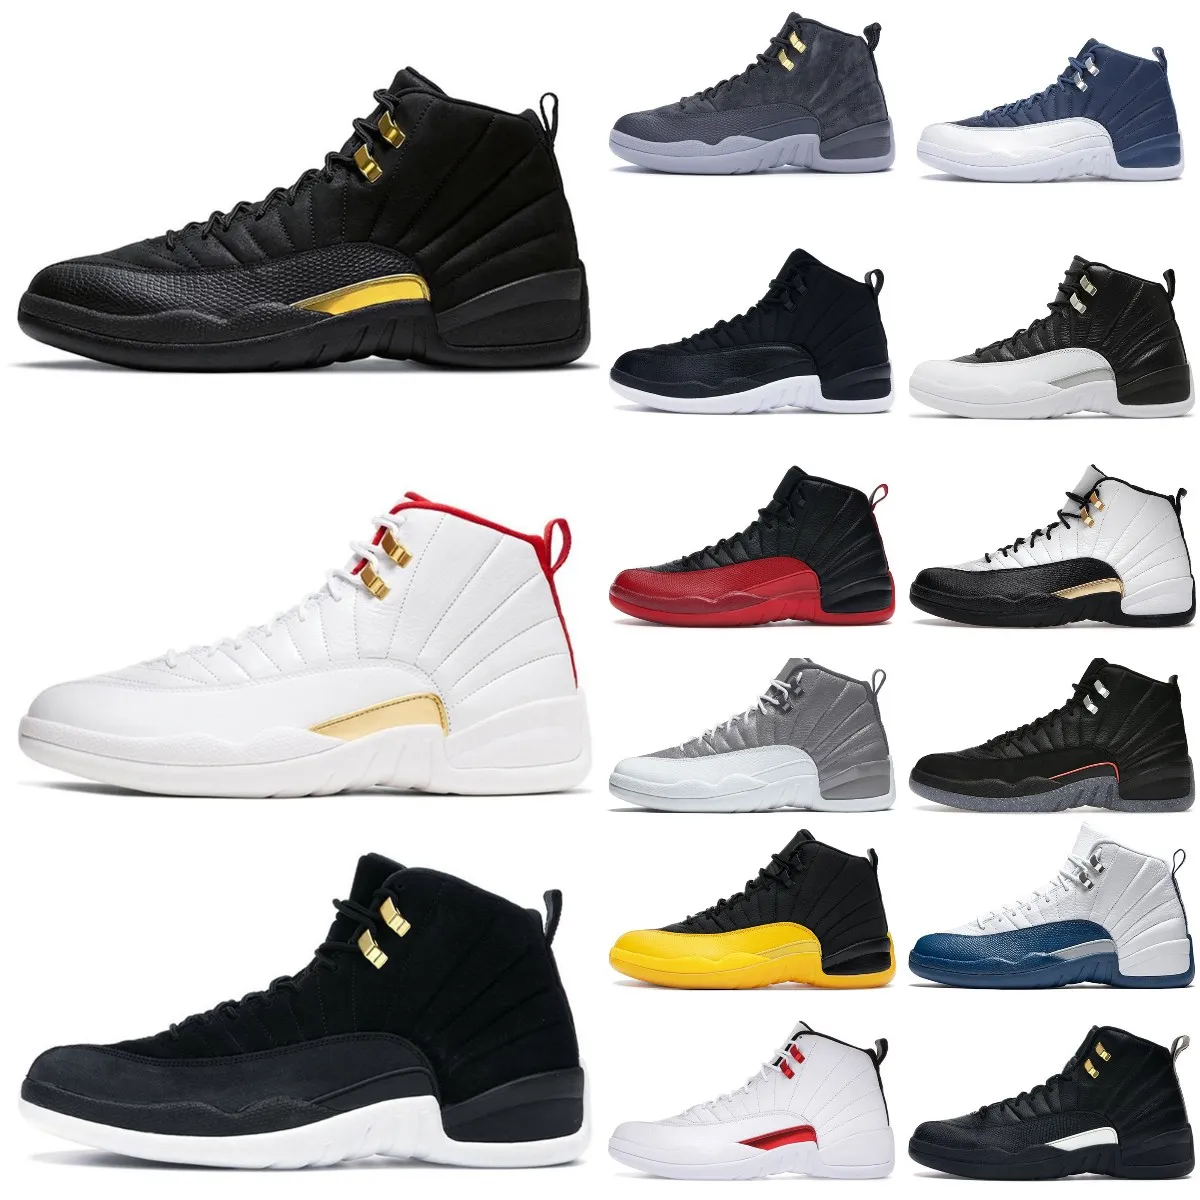 2022 Nouvelles chaussures de basket-ball 12s Jumpman 12 Black Taxi Reverse Flut Game Dark Concord University Gold Stealth The Master Mens Trainers Sports Sneakers 40-47